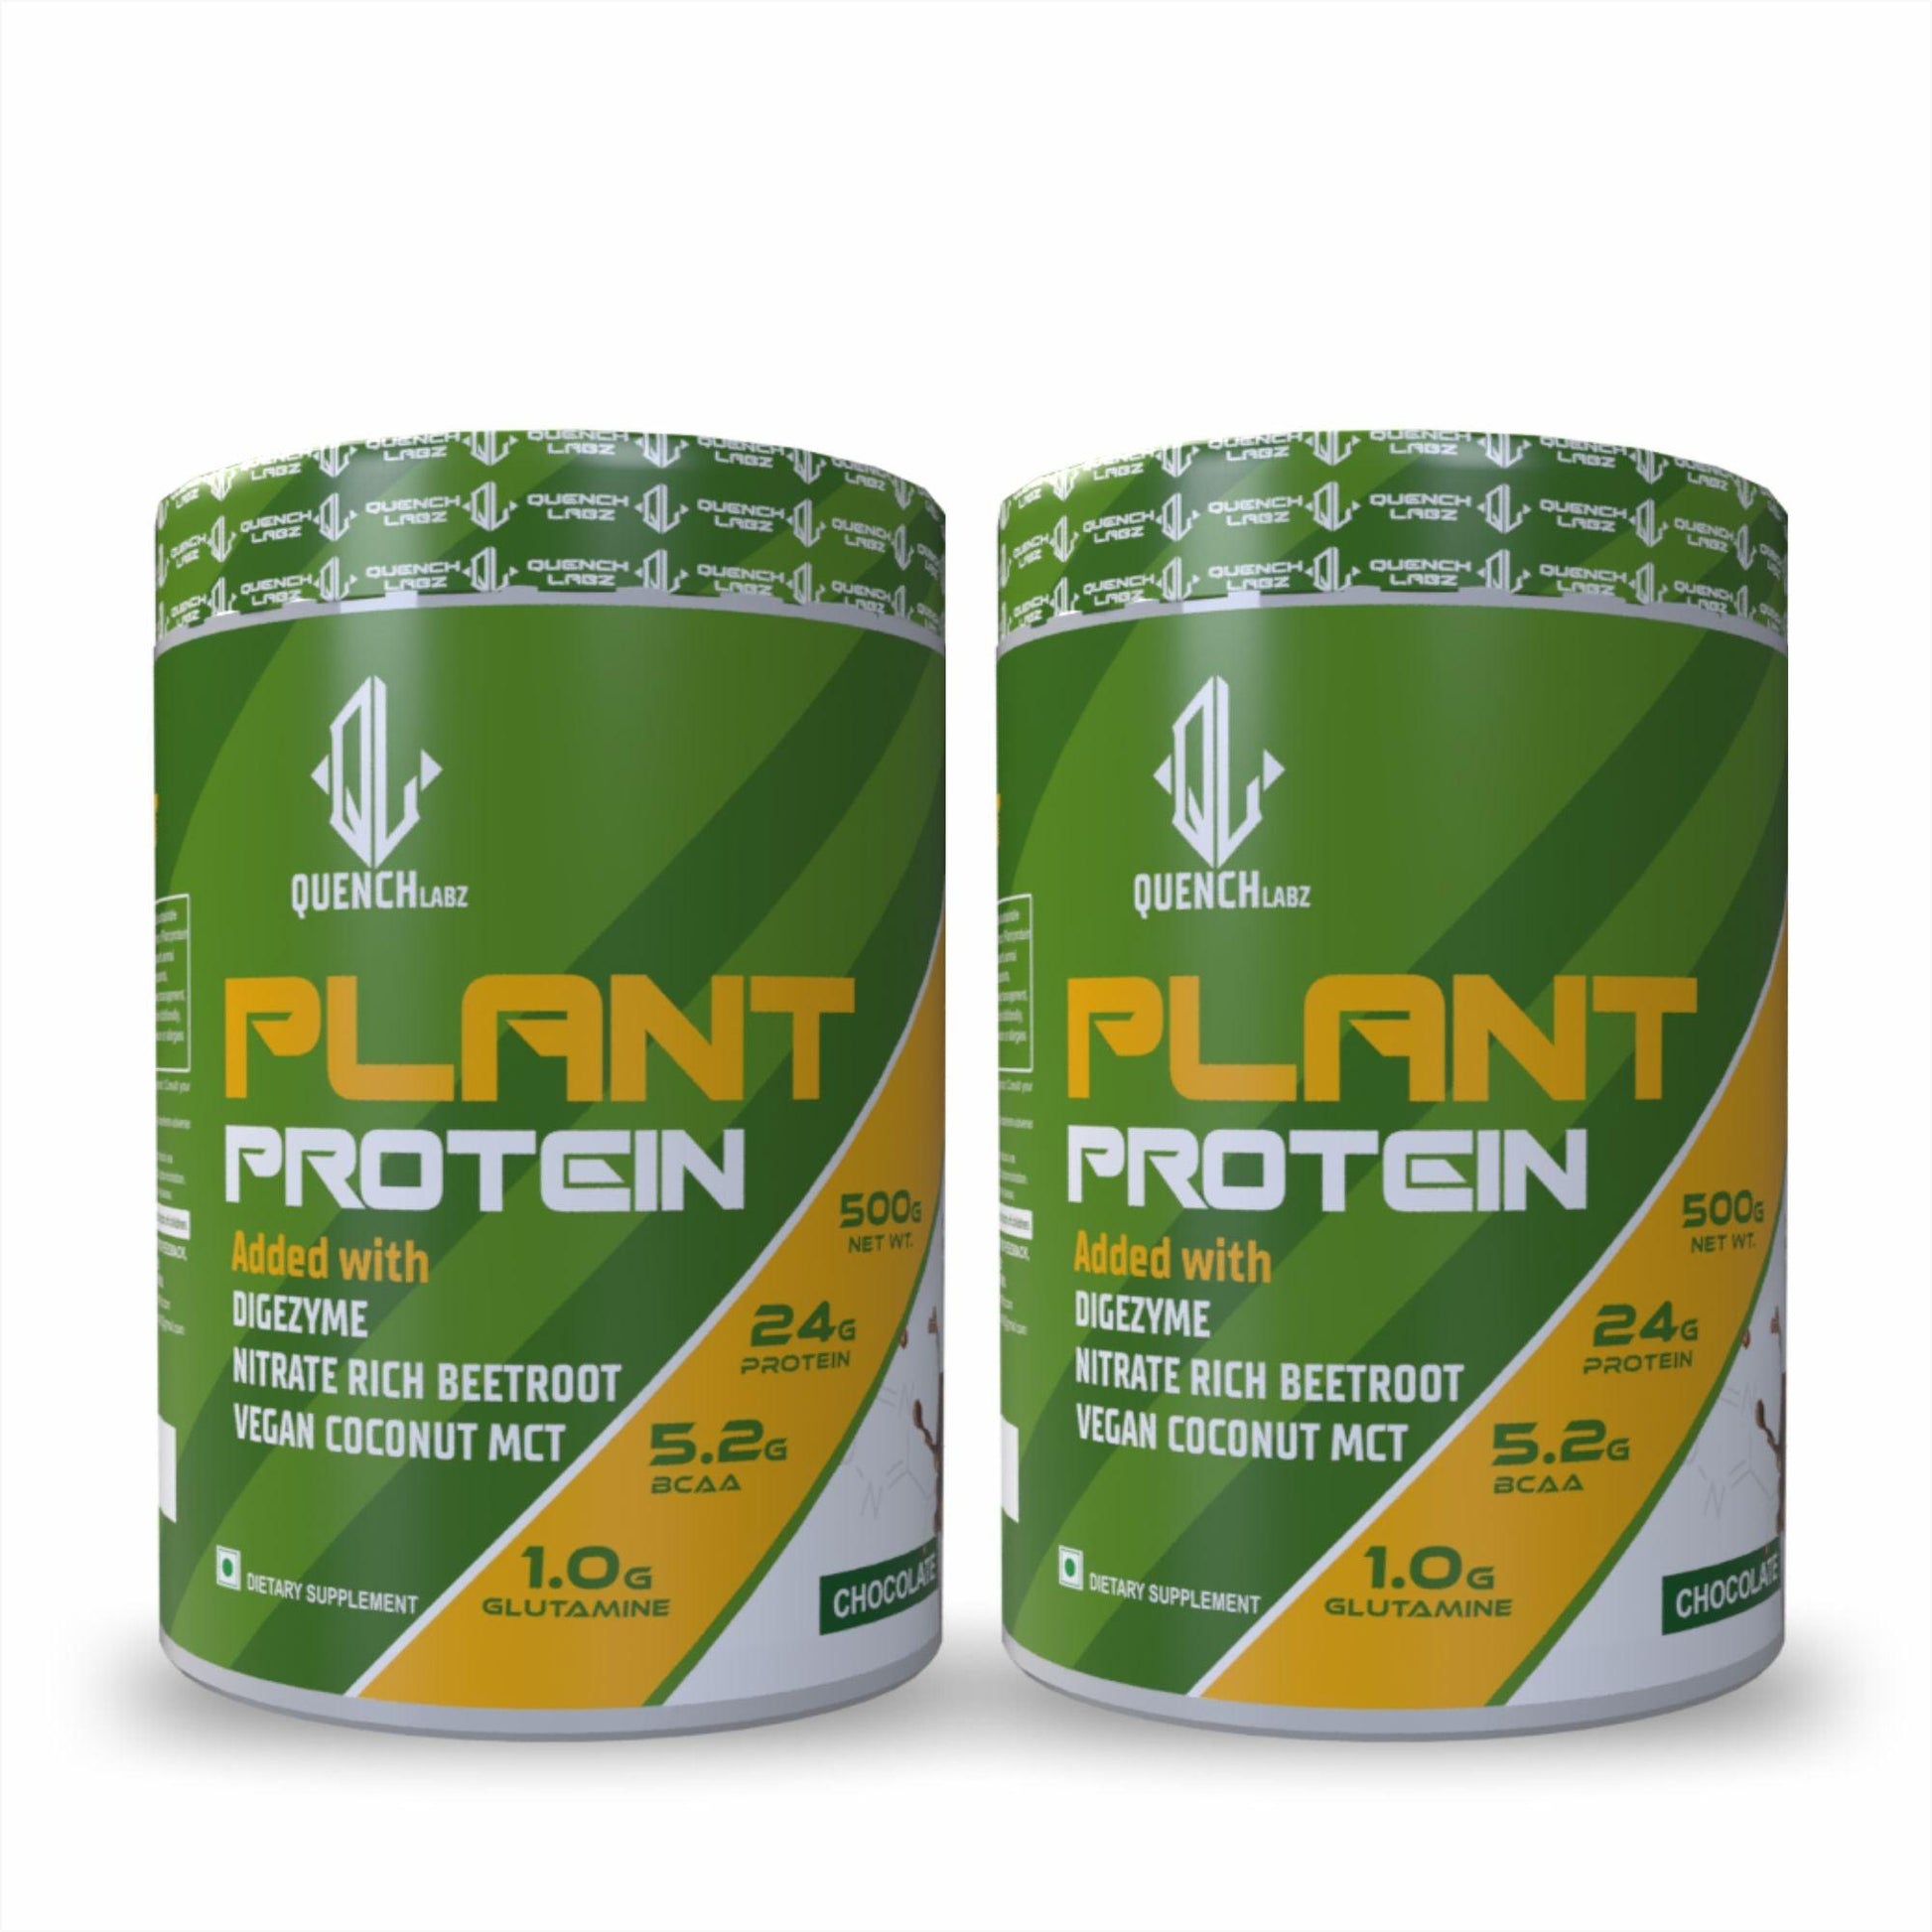 Plant Protein - Premium Quality - Buy 1 Get 1 | 500 Gm Each - Quenchlabz